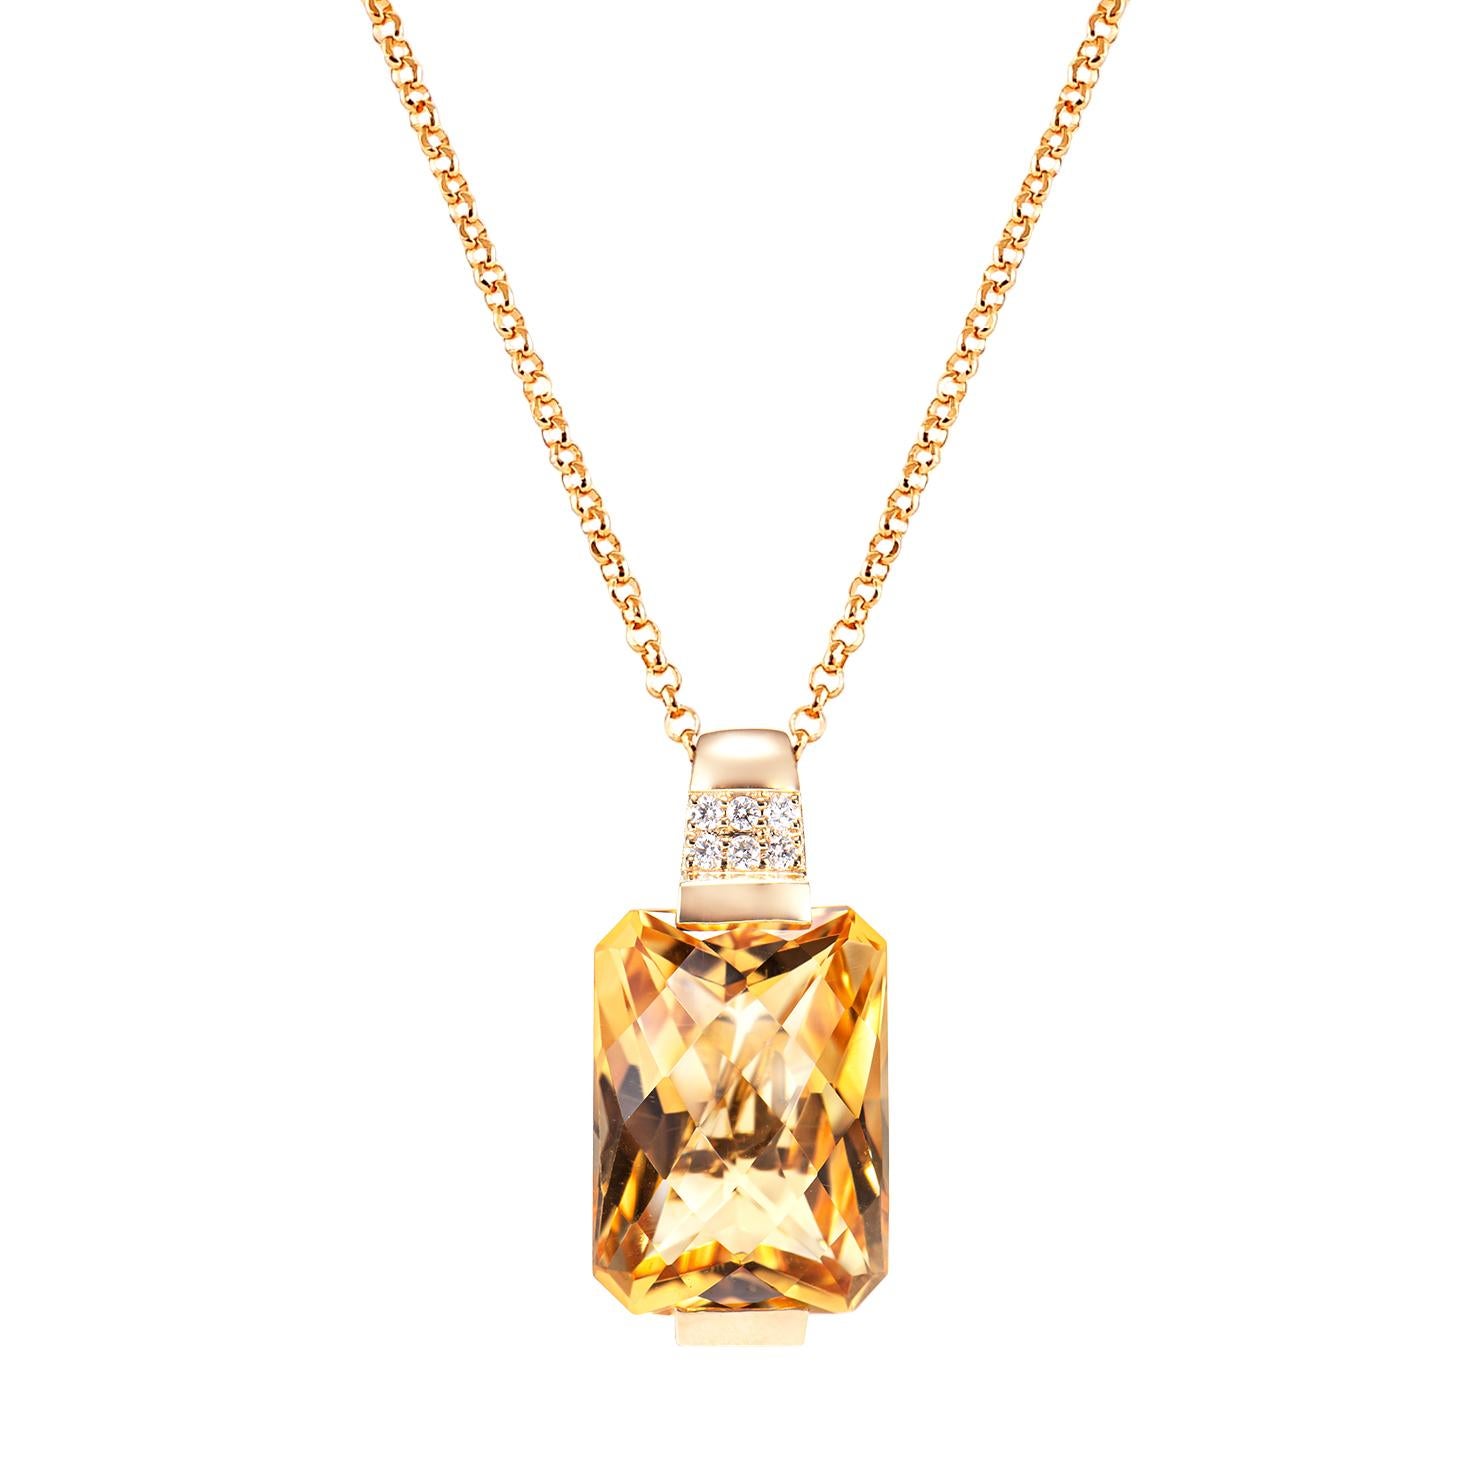 It is fancy Citrine Pendant in a Octagon shape with yellow hue. The Pendant is elegant and can be worn for many occasions. 

Citrine Pendant in 18 Karat Yellow Gold with White Diamond.

Citrine: 15.51 carat, 18X13mm size, Octagon shape.
White